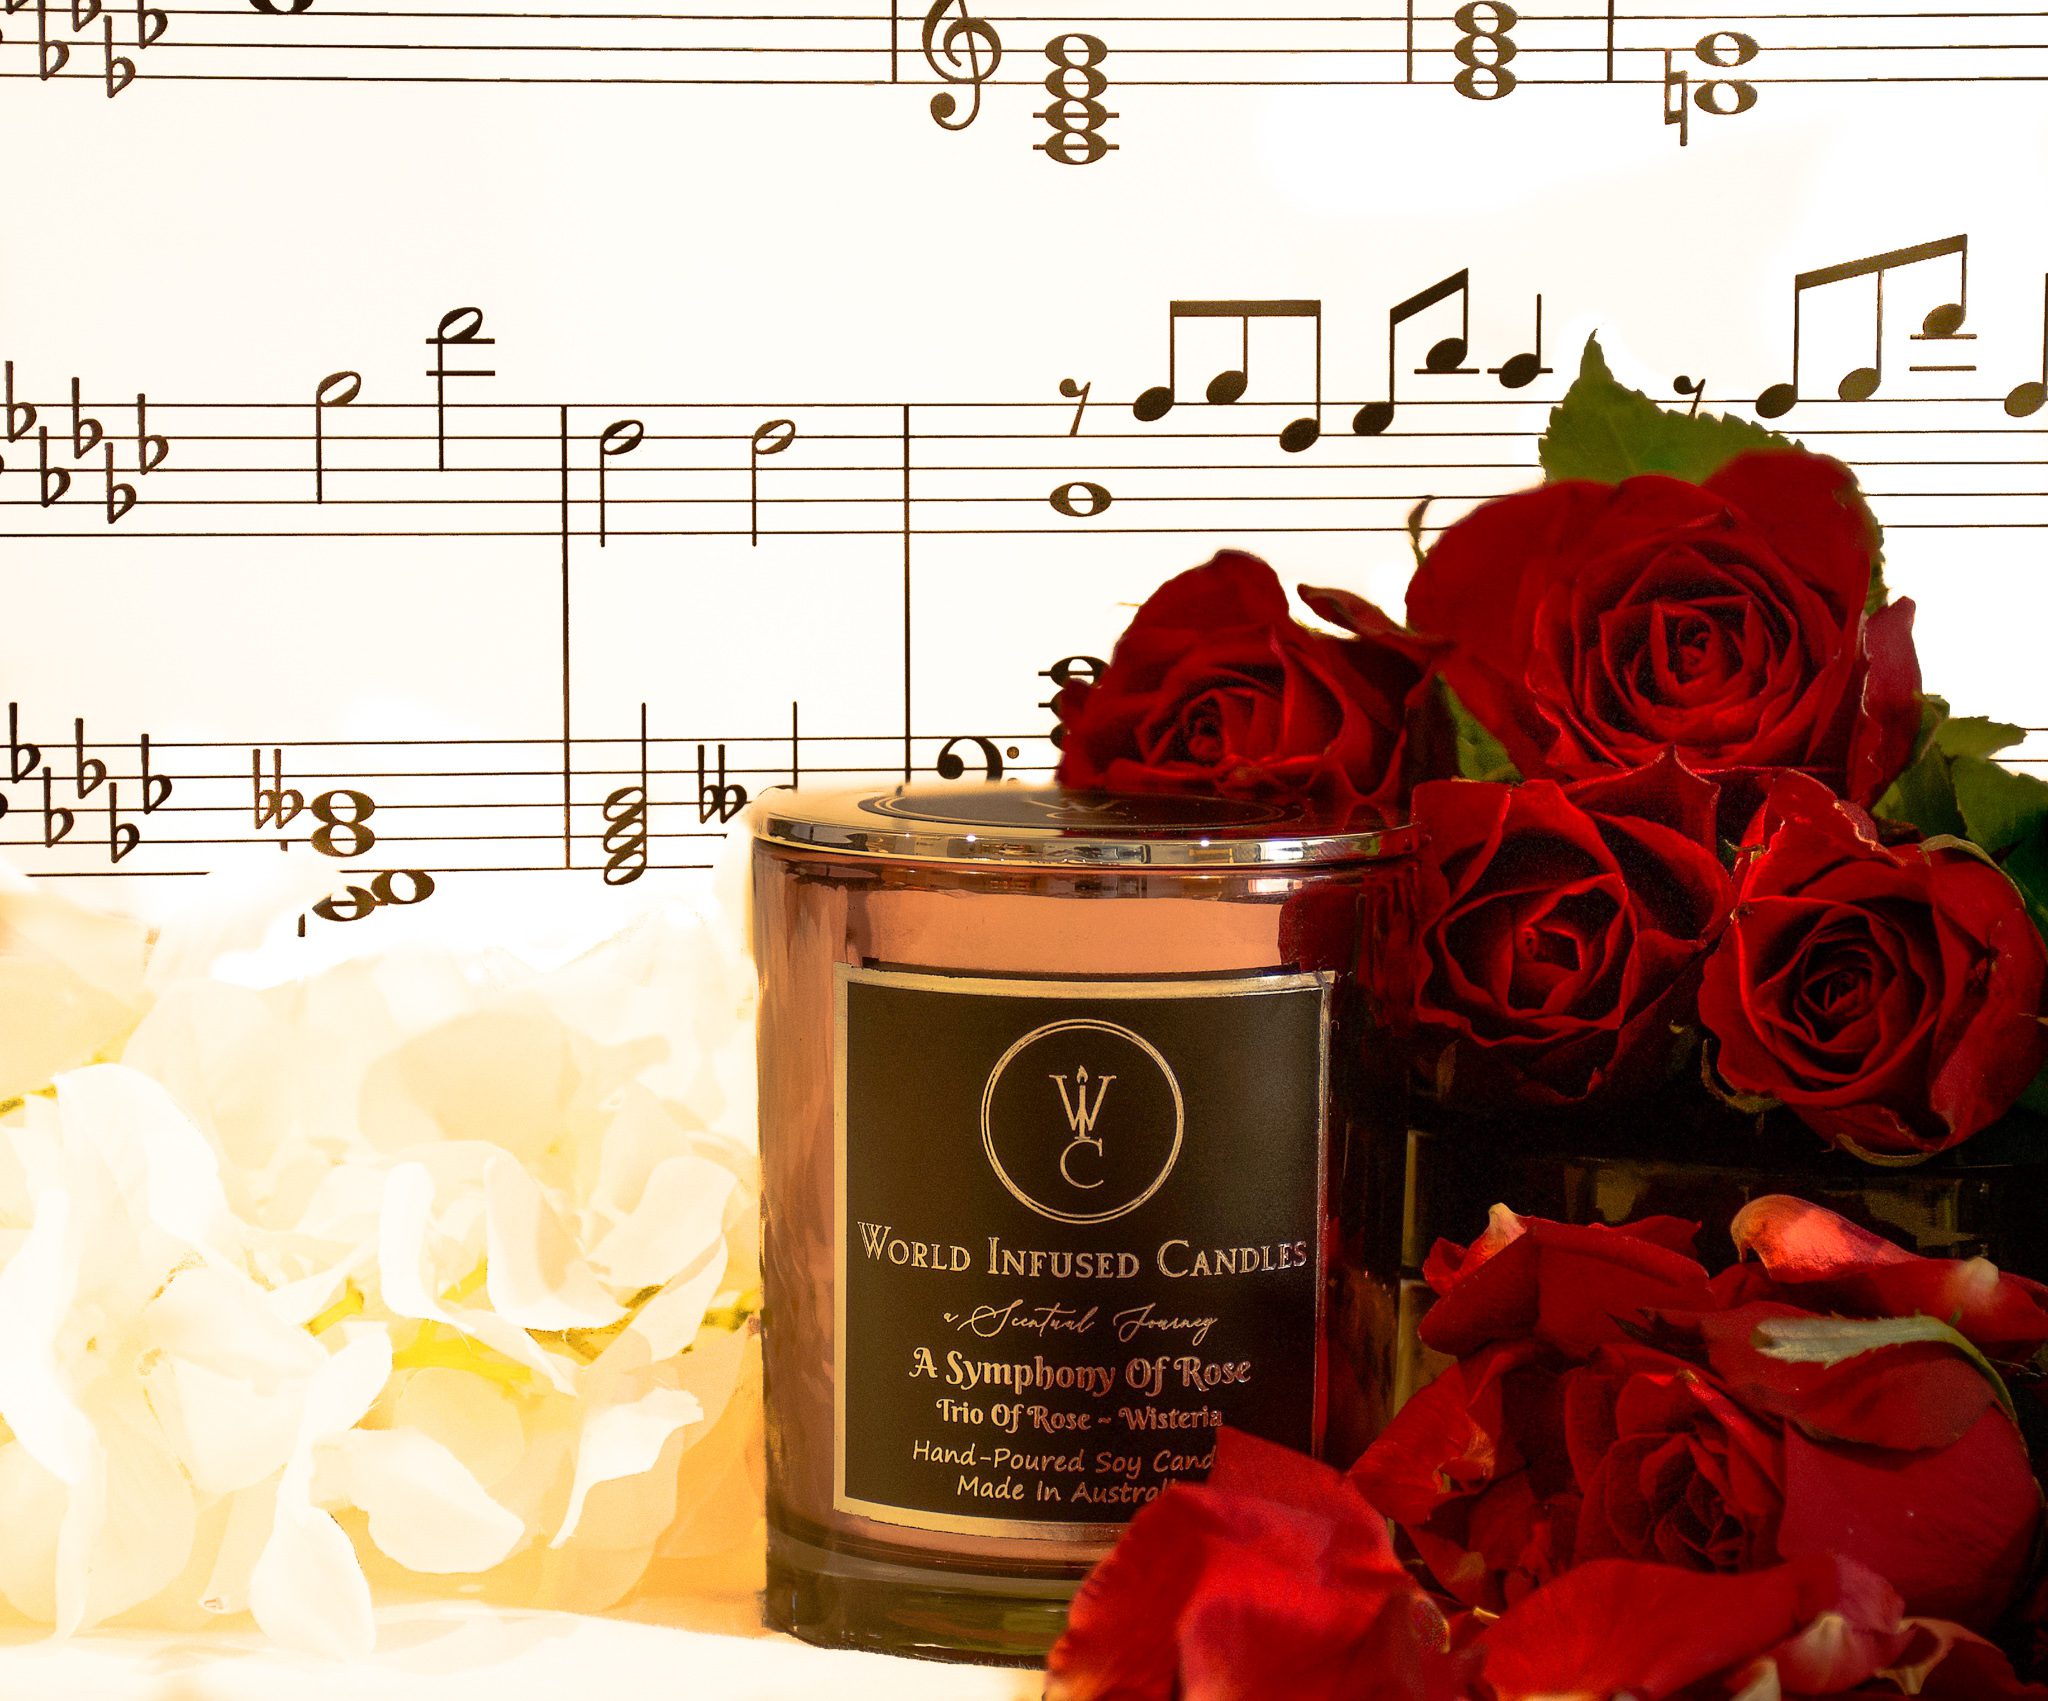 A Symphony Of Rose Soy Candle in the center surrounded by roses and music notes